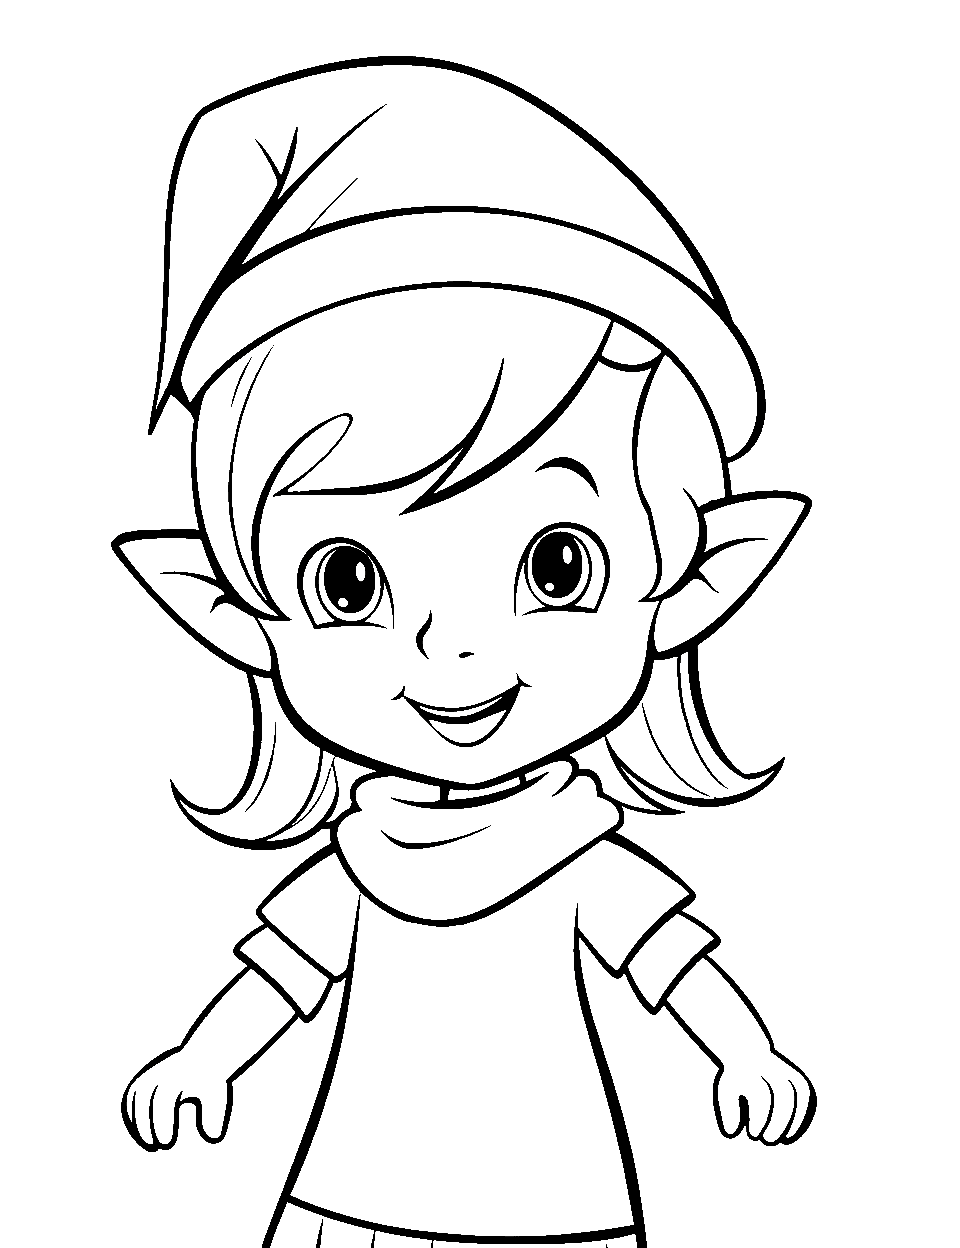 Simple Elf Portrait for Beginners Coloring Page - A simple, easy-to-color portrait of a smiling elf suitable for preschoolers.